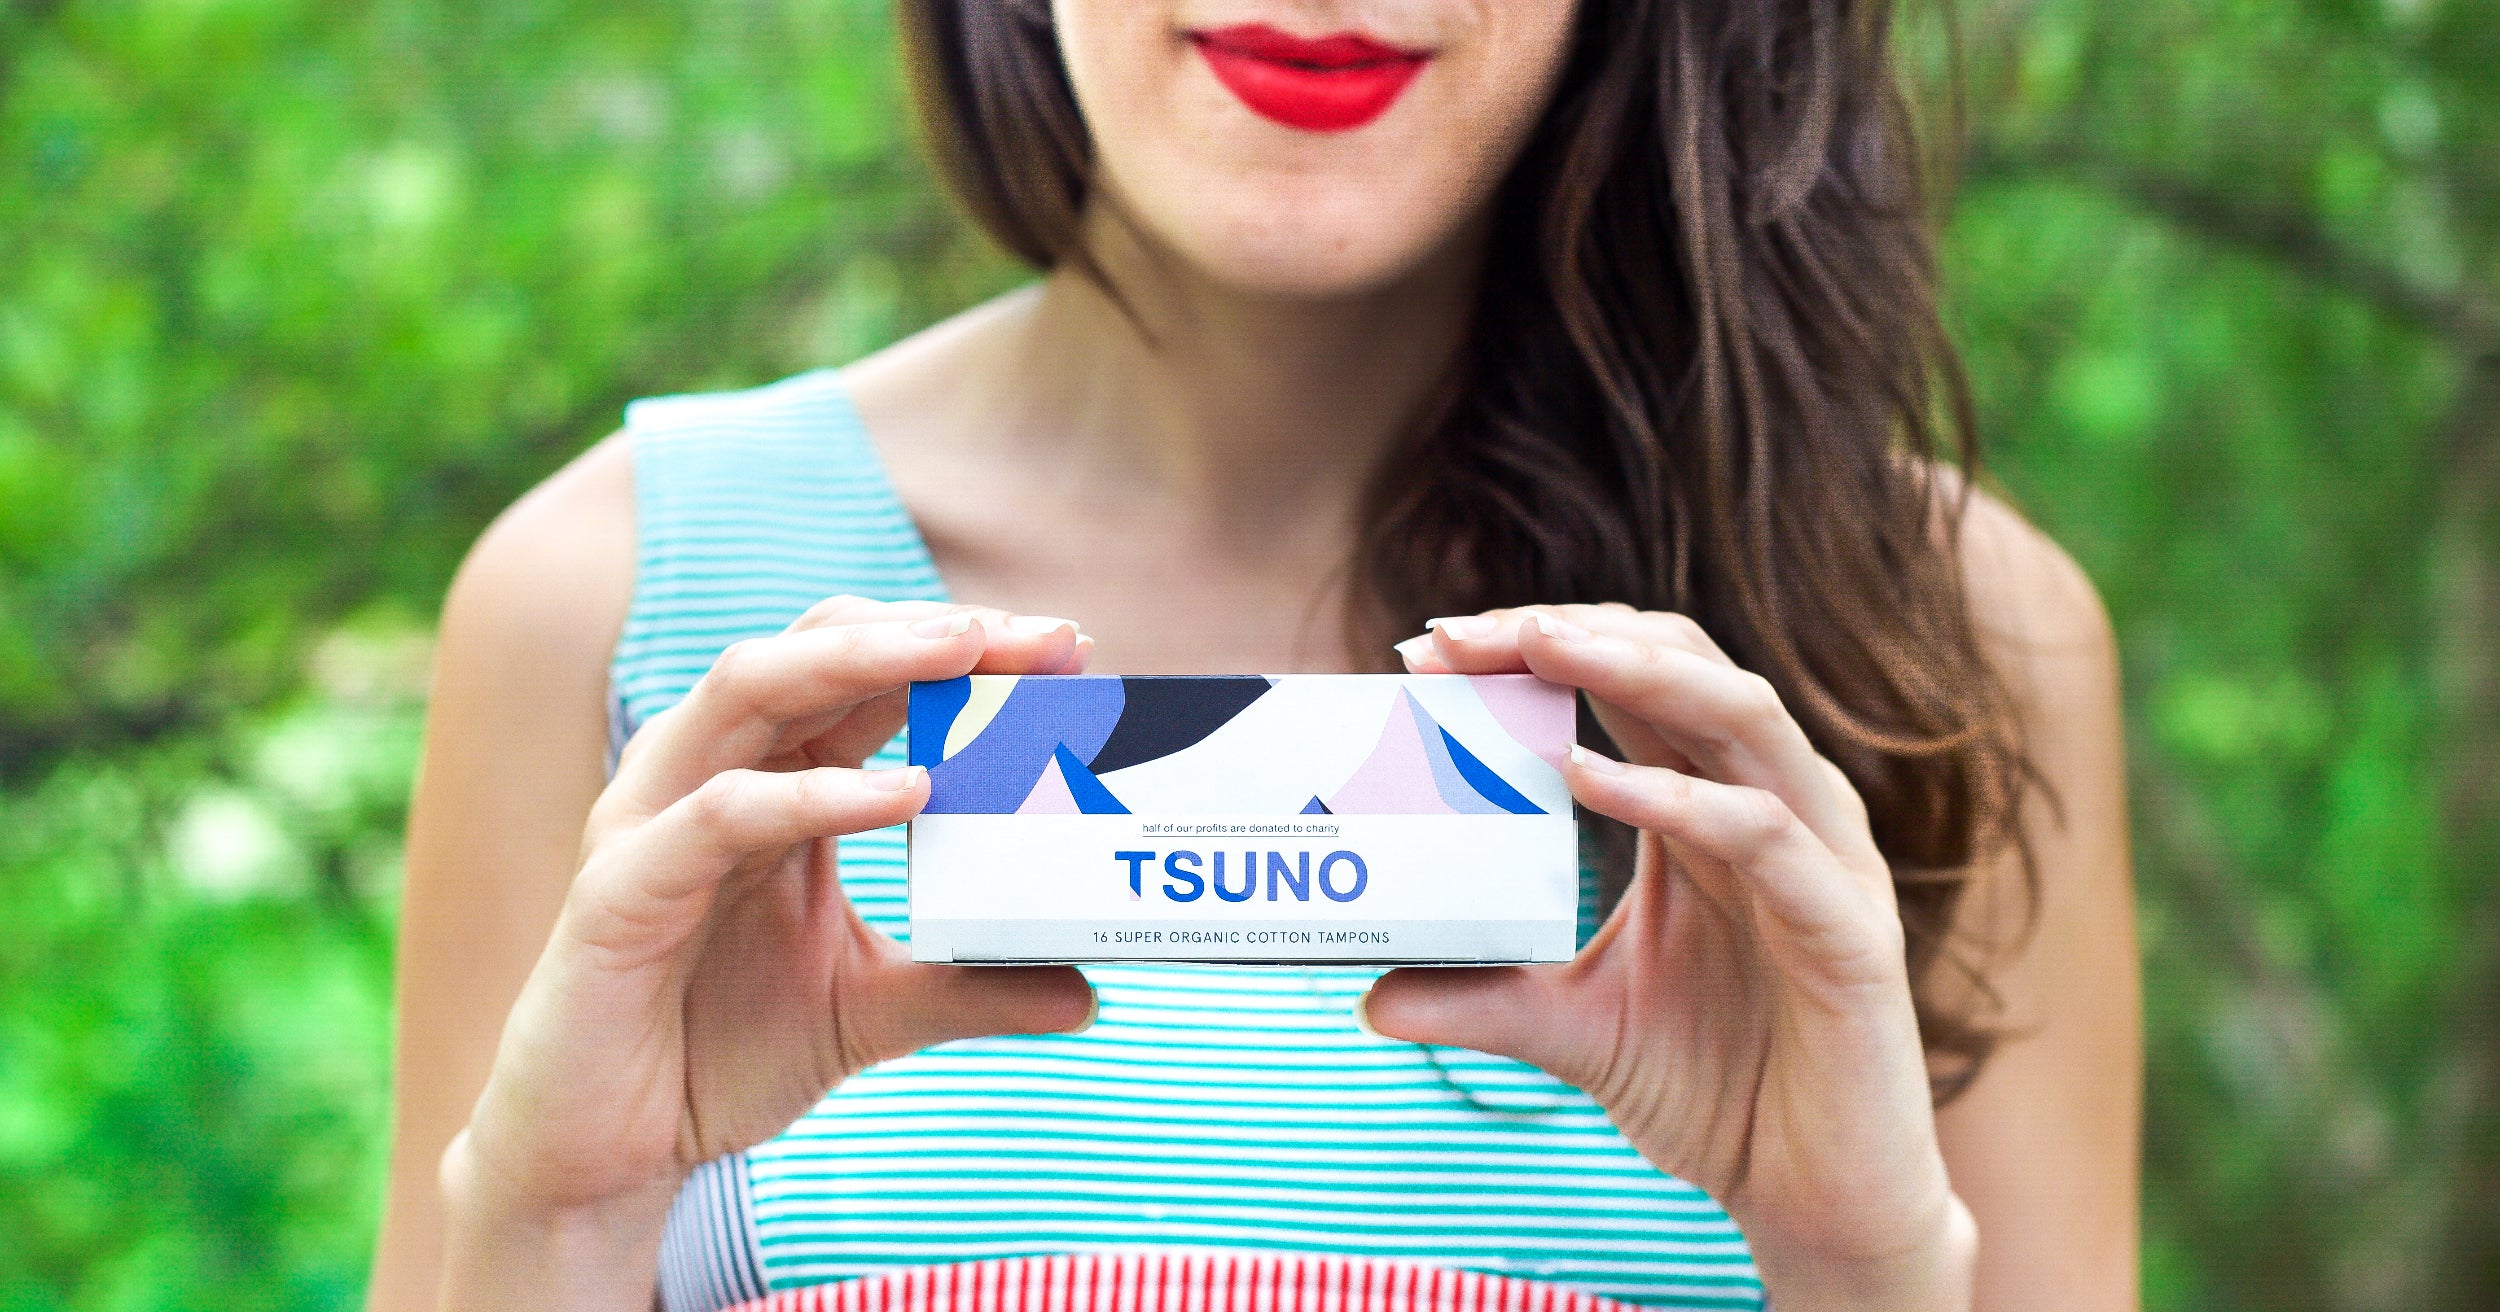 Crop of a woman holding a box of tampons that reads "Tsuno"